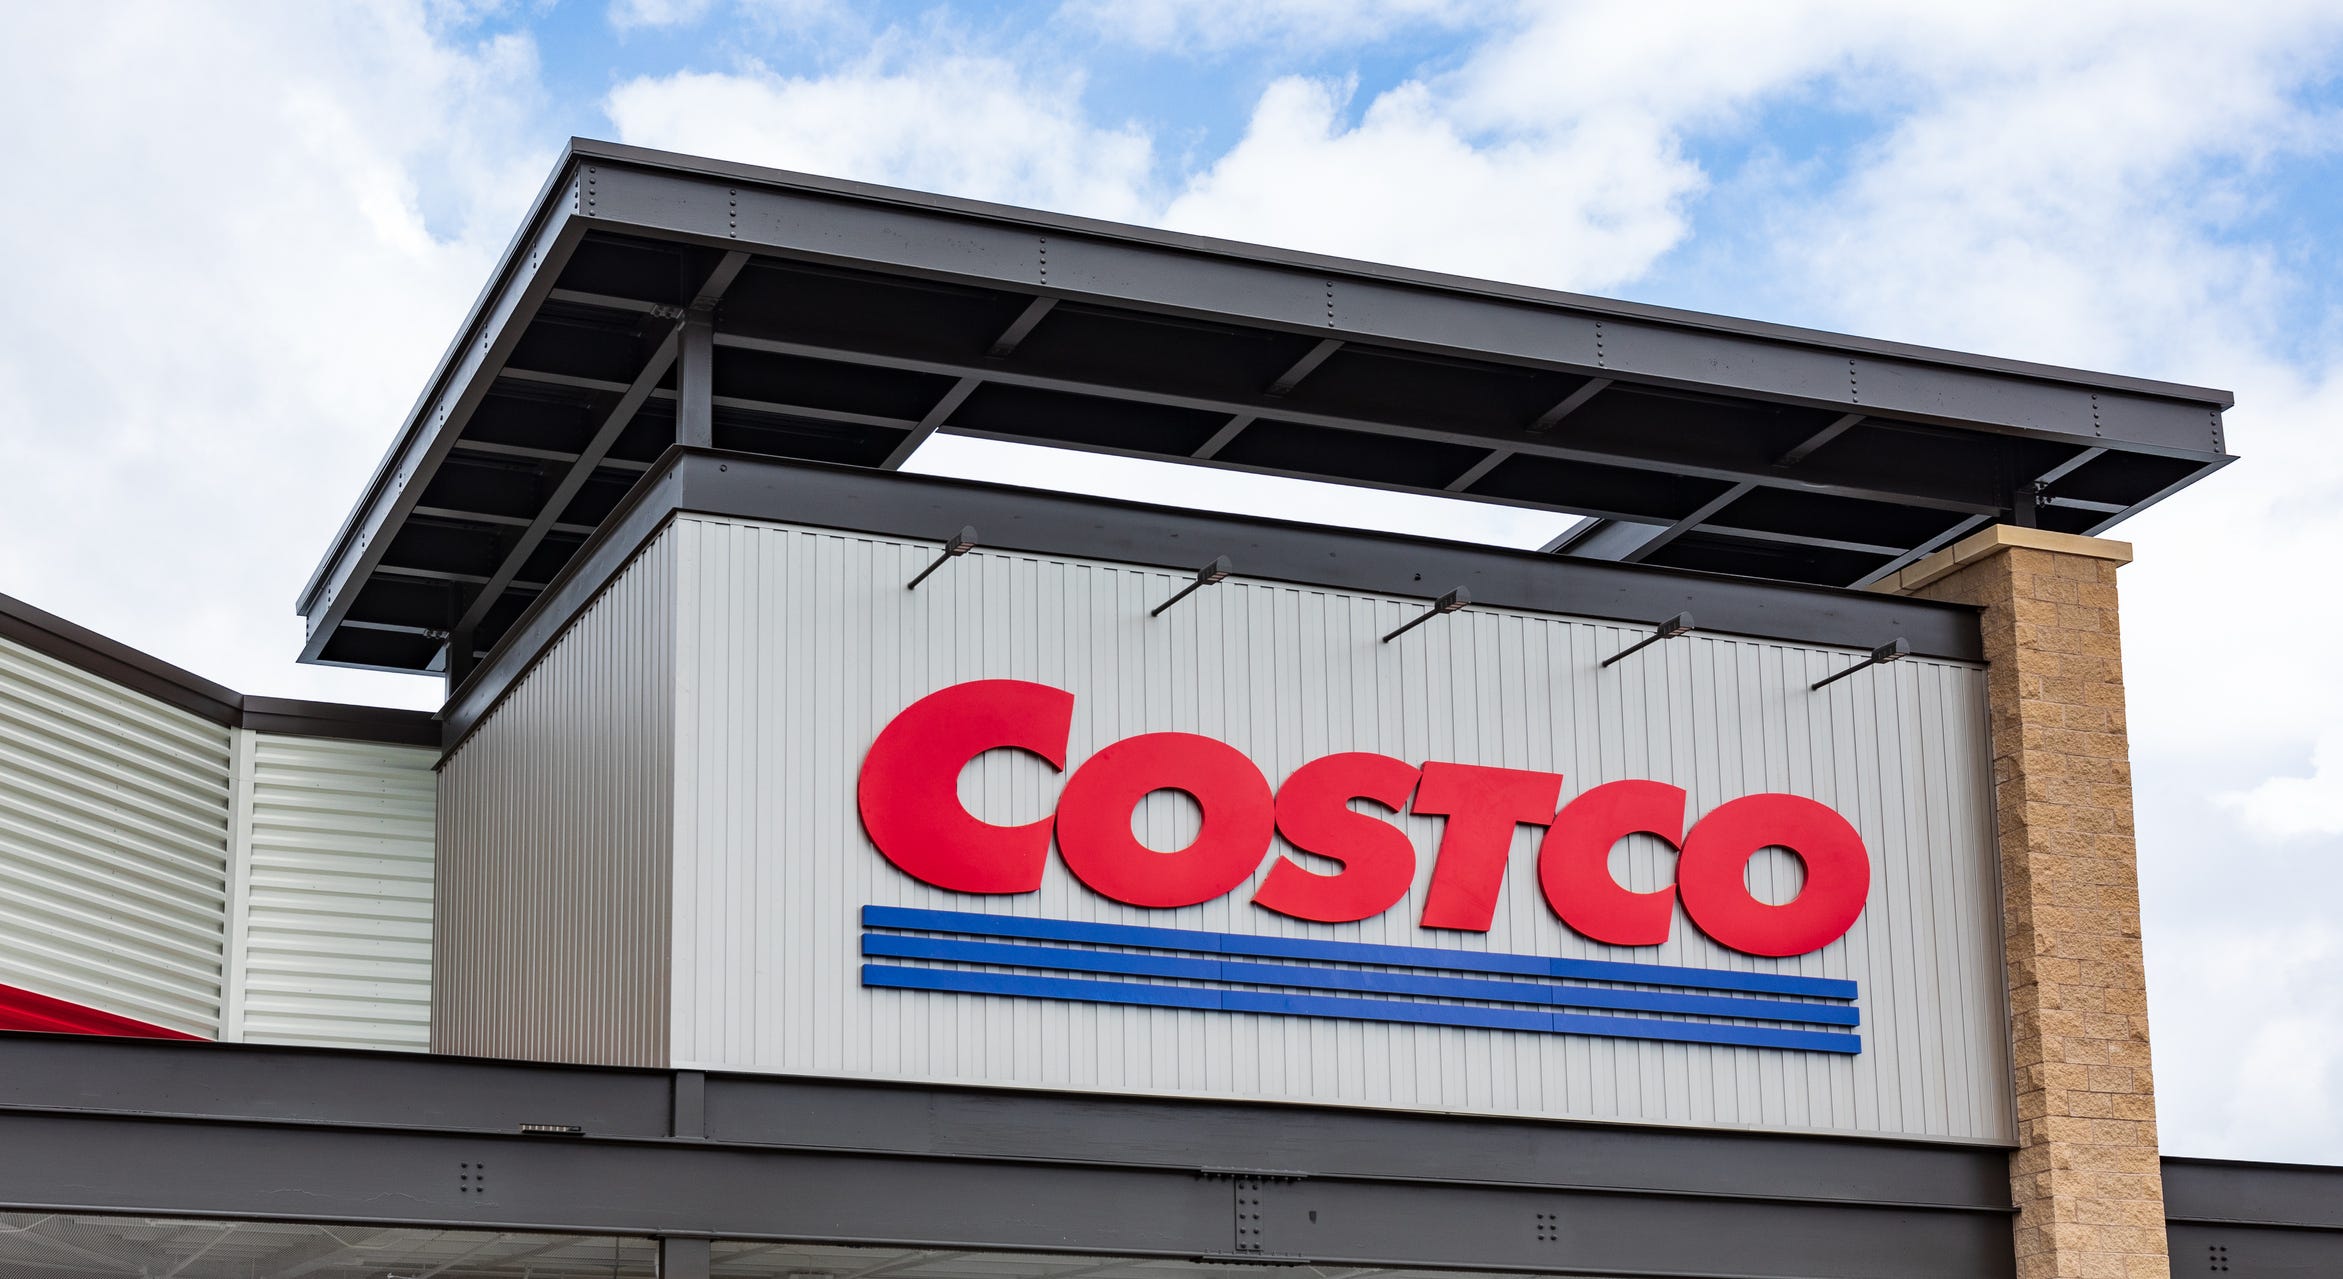 Costco Is Making Another Change to Its Membership Rules That Will Change the Way You Shop